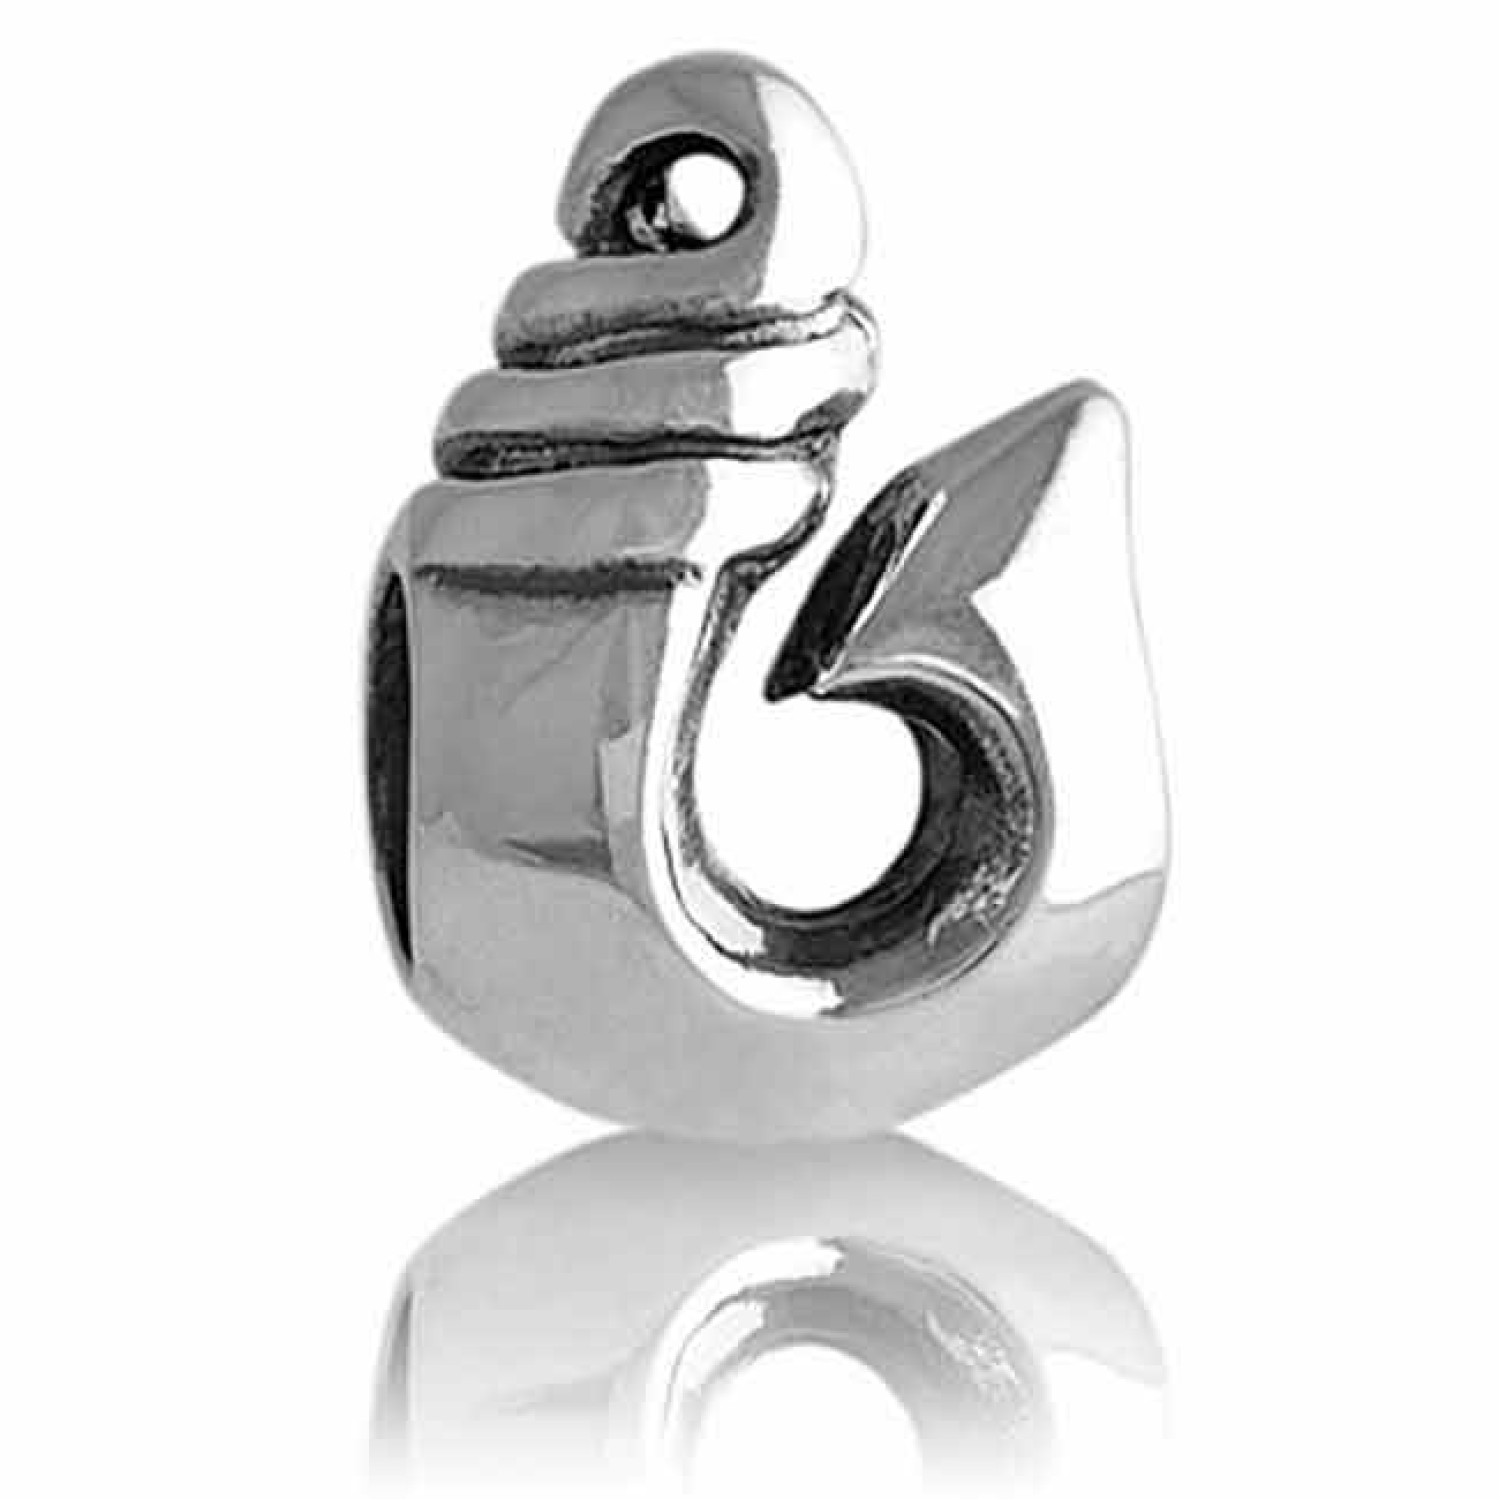 LK001 NZ Fish Hook - Safe Travel. NZ Fish Hook - Safe Travel Evolve Charm Jewellery In Maori culture the Hei Matau (fish hook) is Taonga (a cultural treasure). Each fish hook is created with a meaning of special significance and is worn with great pride. 